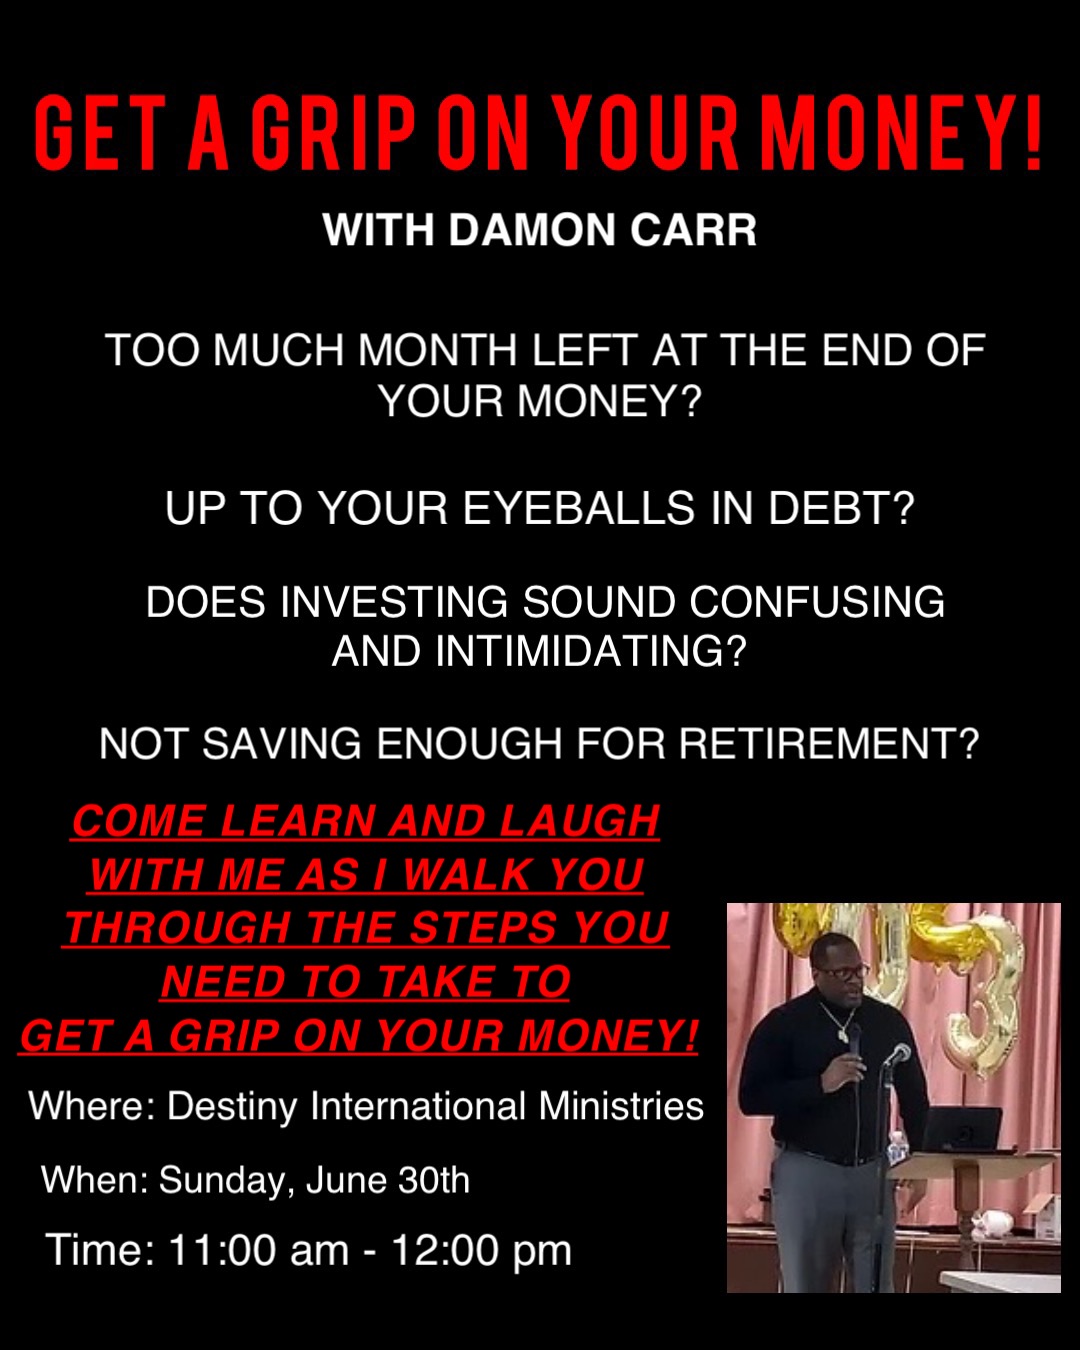 COME LEARN AND LAUGH WITH ME AS I WALK YOU THROUGH THE STEPS YOU NEED TO TAKE TO 
GET A GRIP ON YOUR MONEY!